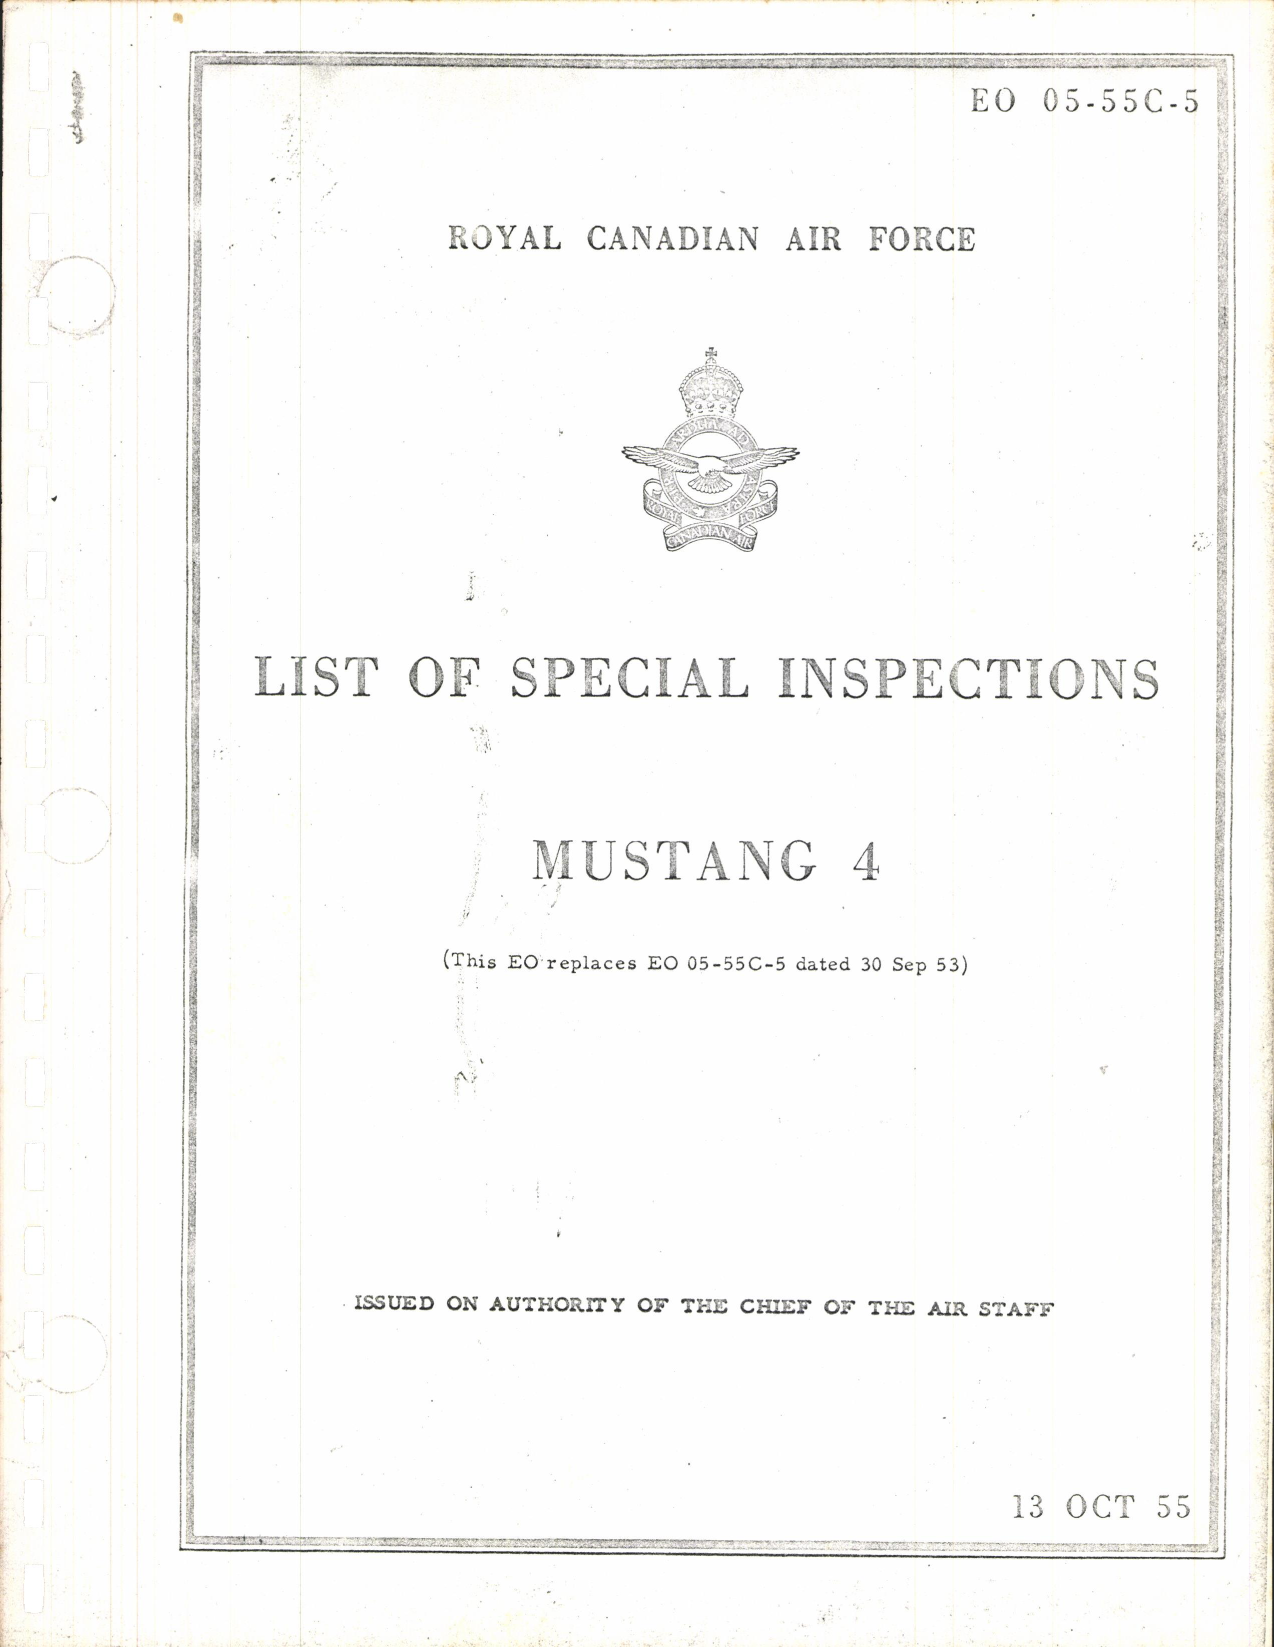 Sample page 1 from AirCorps Library document: List of Special Inspections for Mustang 4